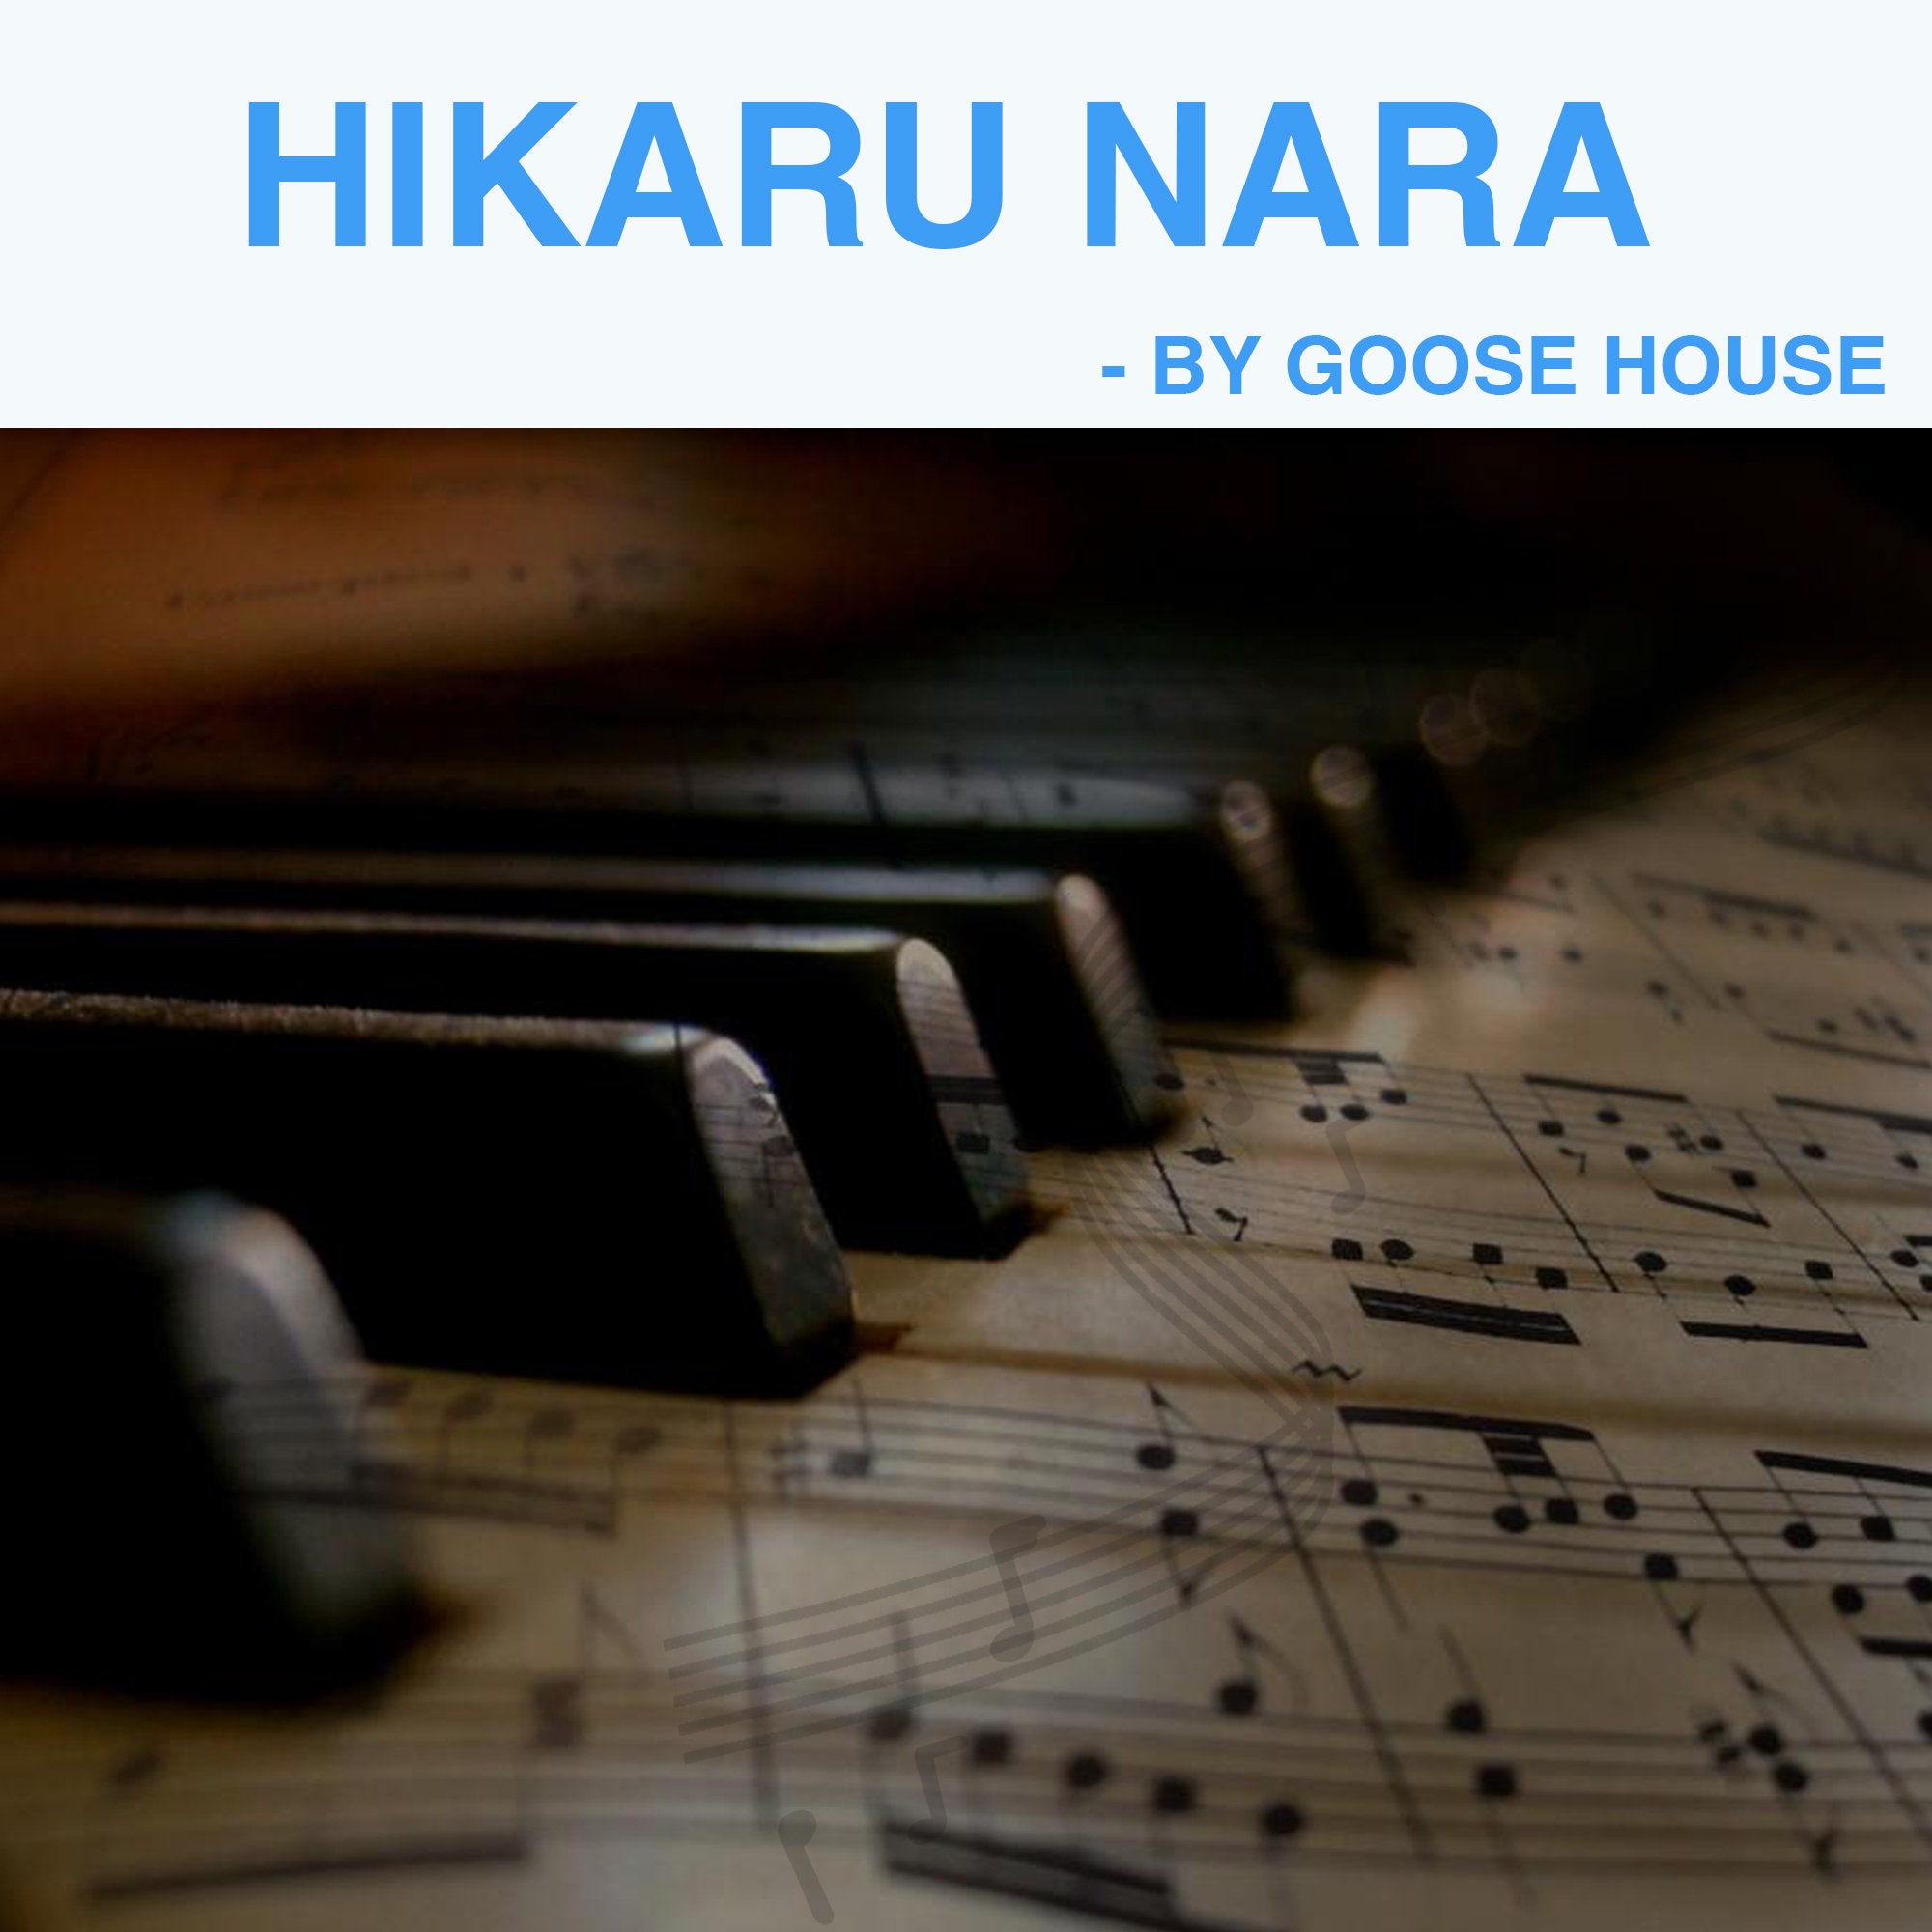 Hikaru Nara (Your Lie In April OP) by Goose House TABs Sheets